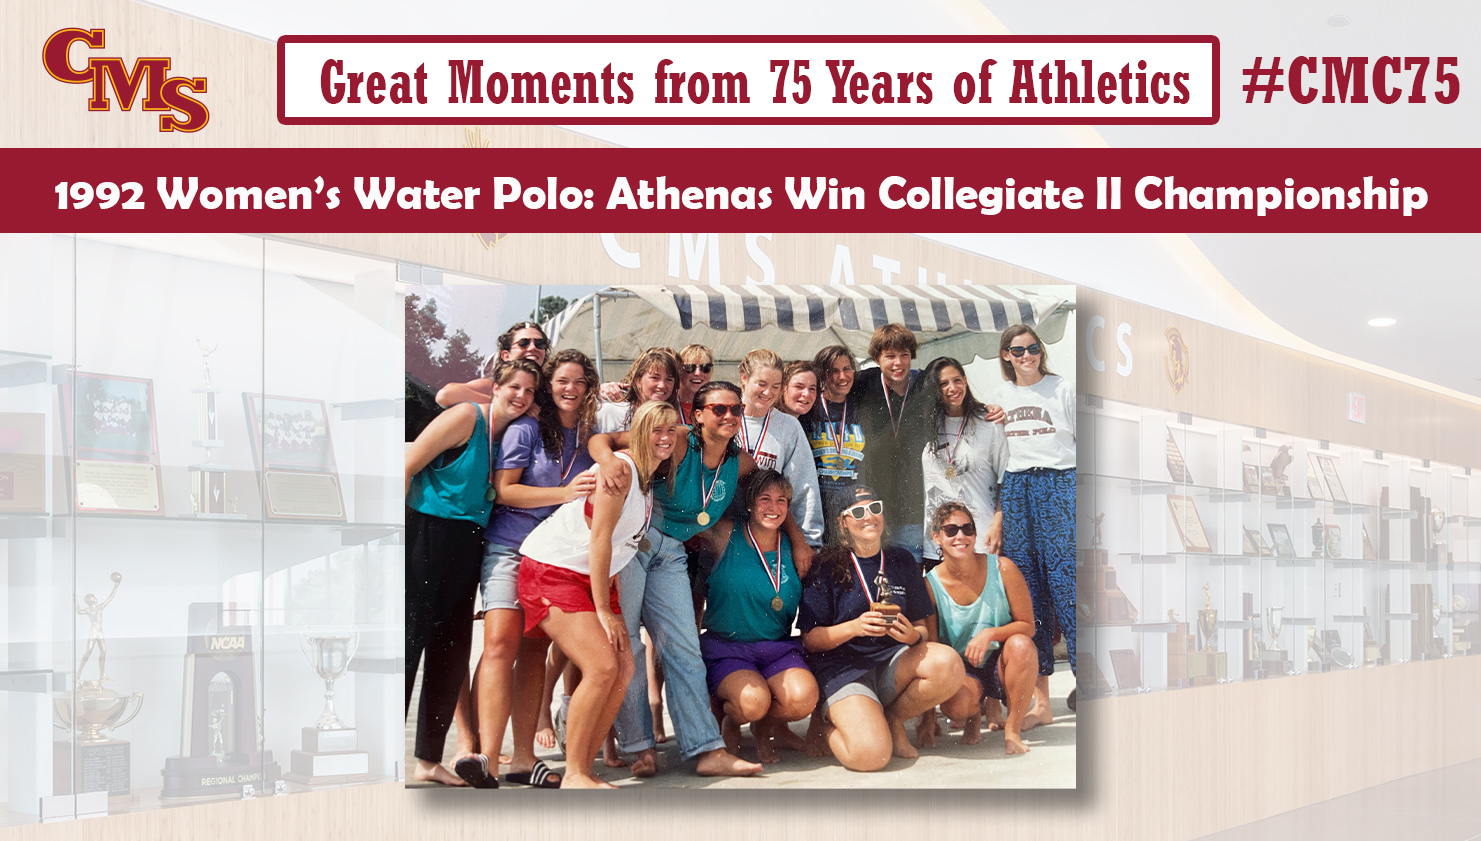 A photo of the women's water polo team after the championship in 1992. Words over the photo read: Great Moments from 75 Years of Athletics. 1992 Women's Water Polo: Athenas Win Collegiate II Championship